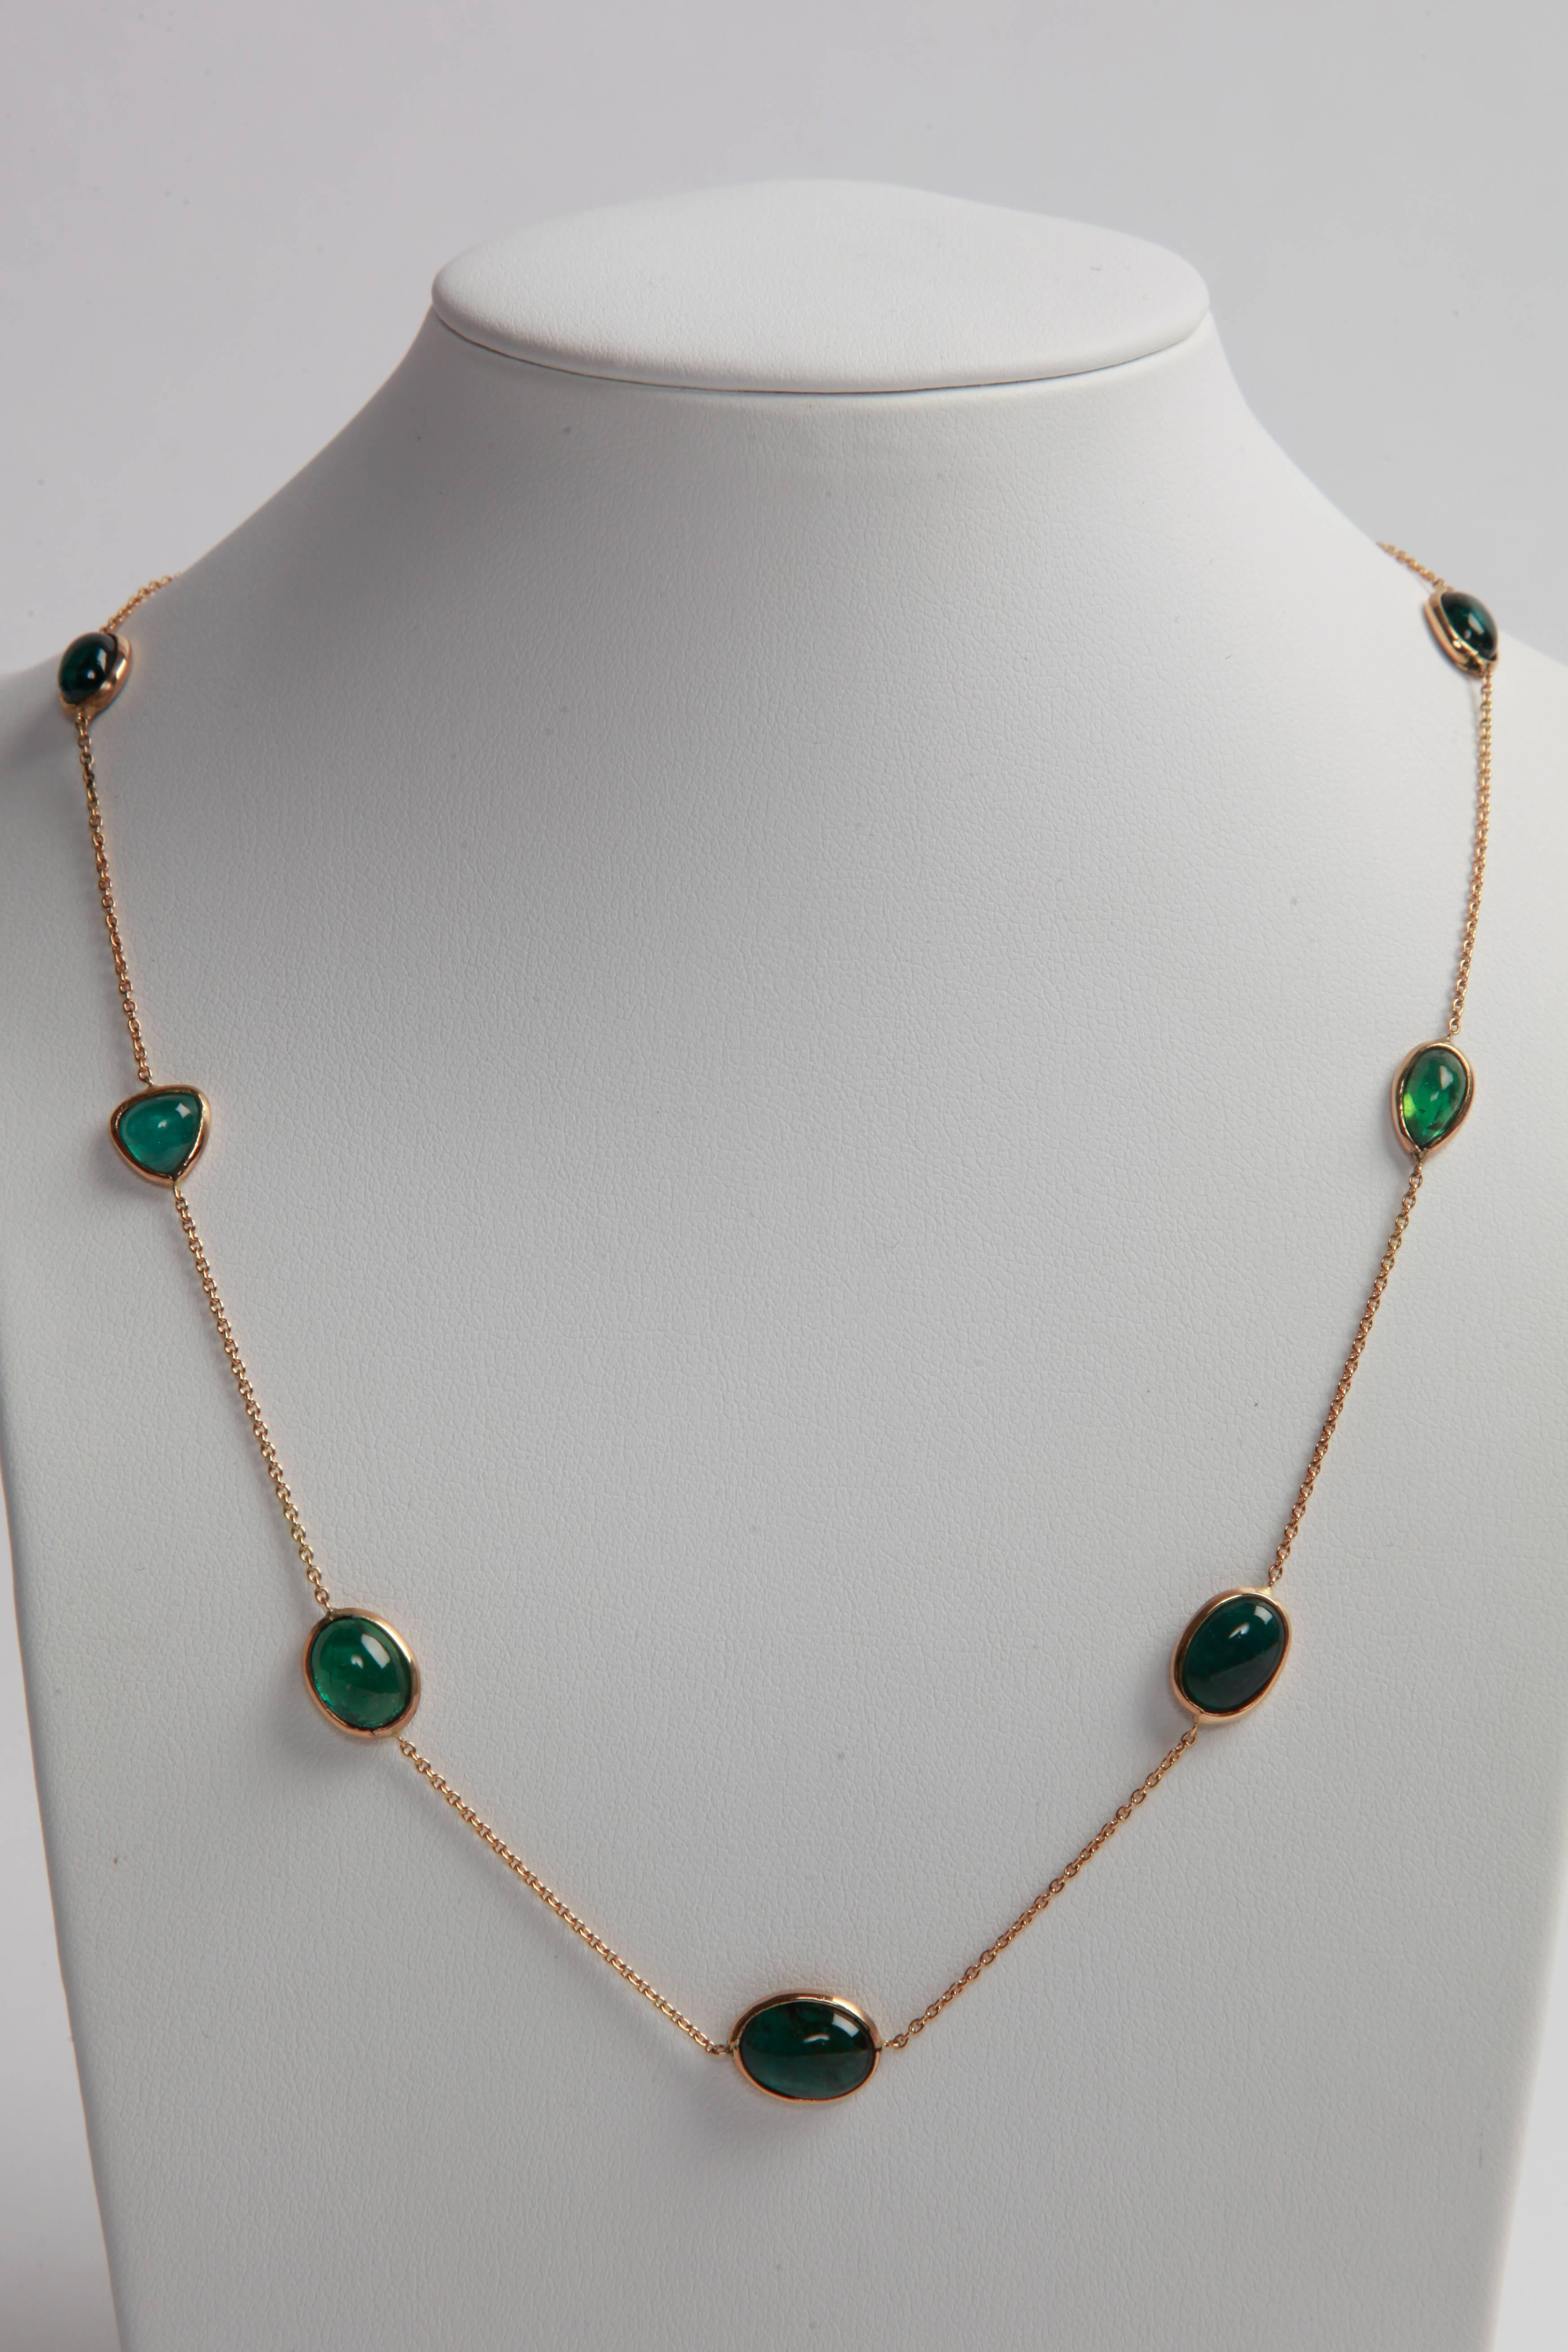 Contemporary 18 K Yellow Gold Necklaces with Tourmalines and Tanzanite Cabochons